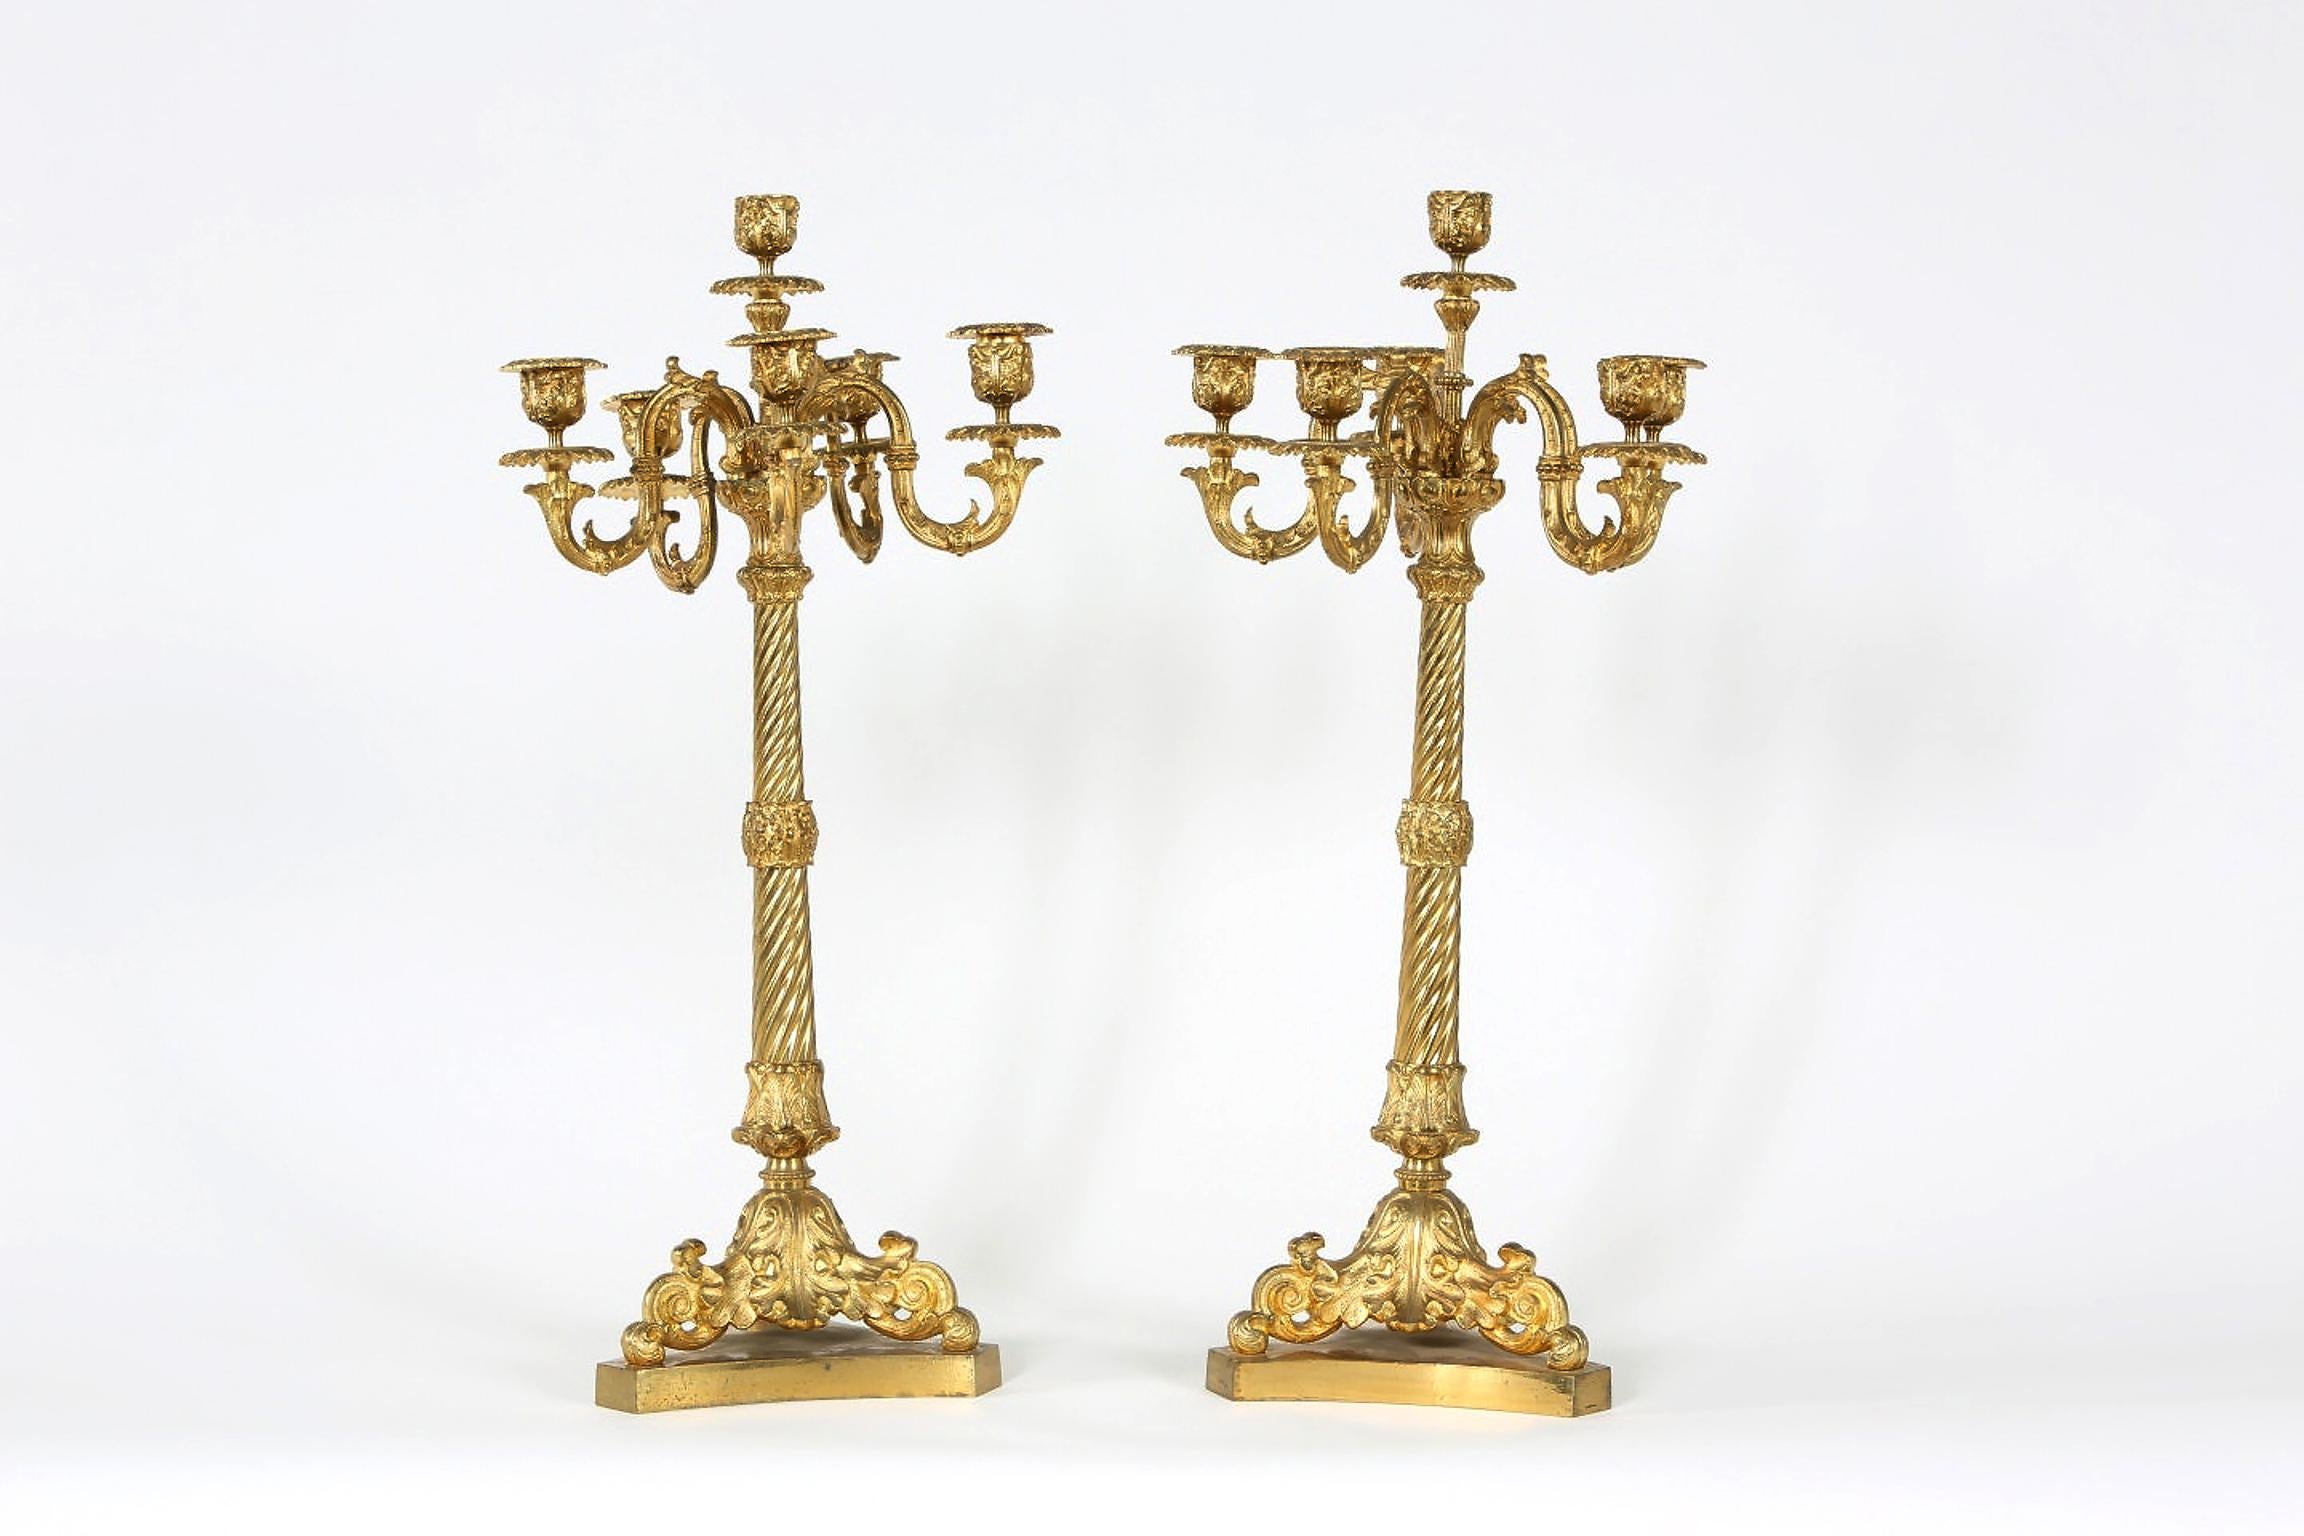 Late 19th century gilt bronze six arms candelabras with exterior design details. Each candelabras measure about 22.5 inches tall x 6.5 inches x 6.5 inches base. Each candelabras has only four bobeche. Very good condition for age with appropriate